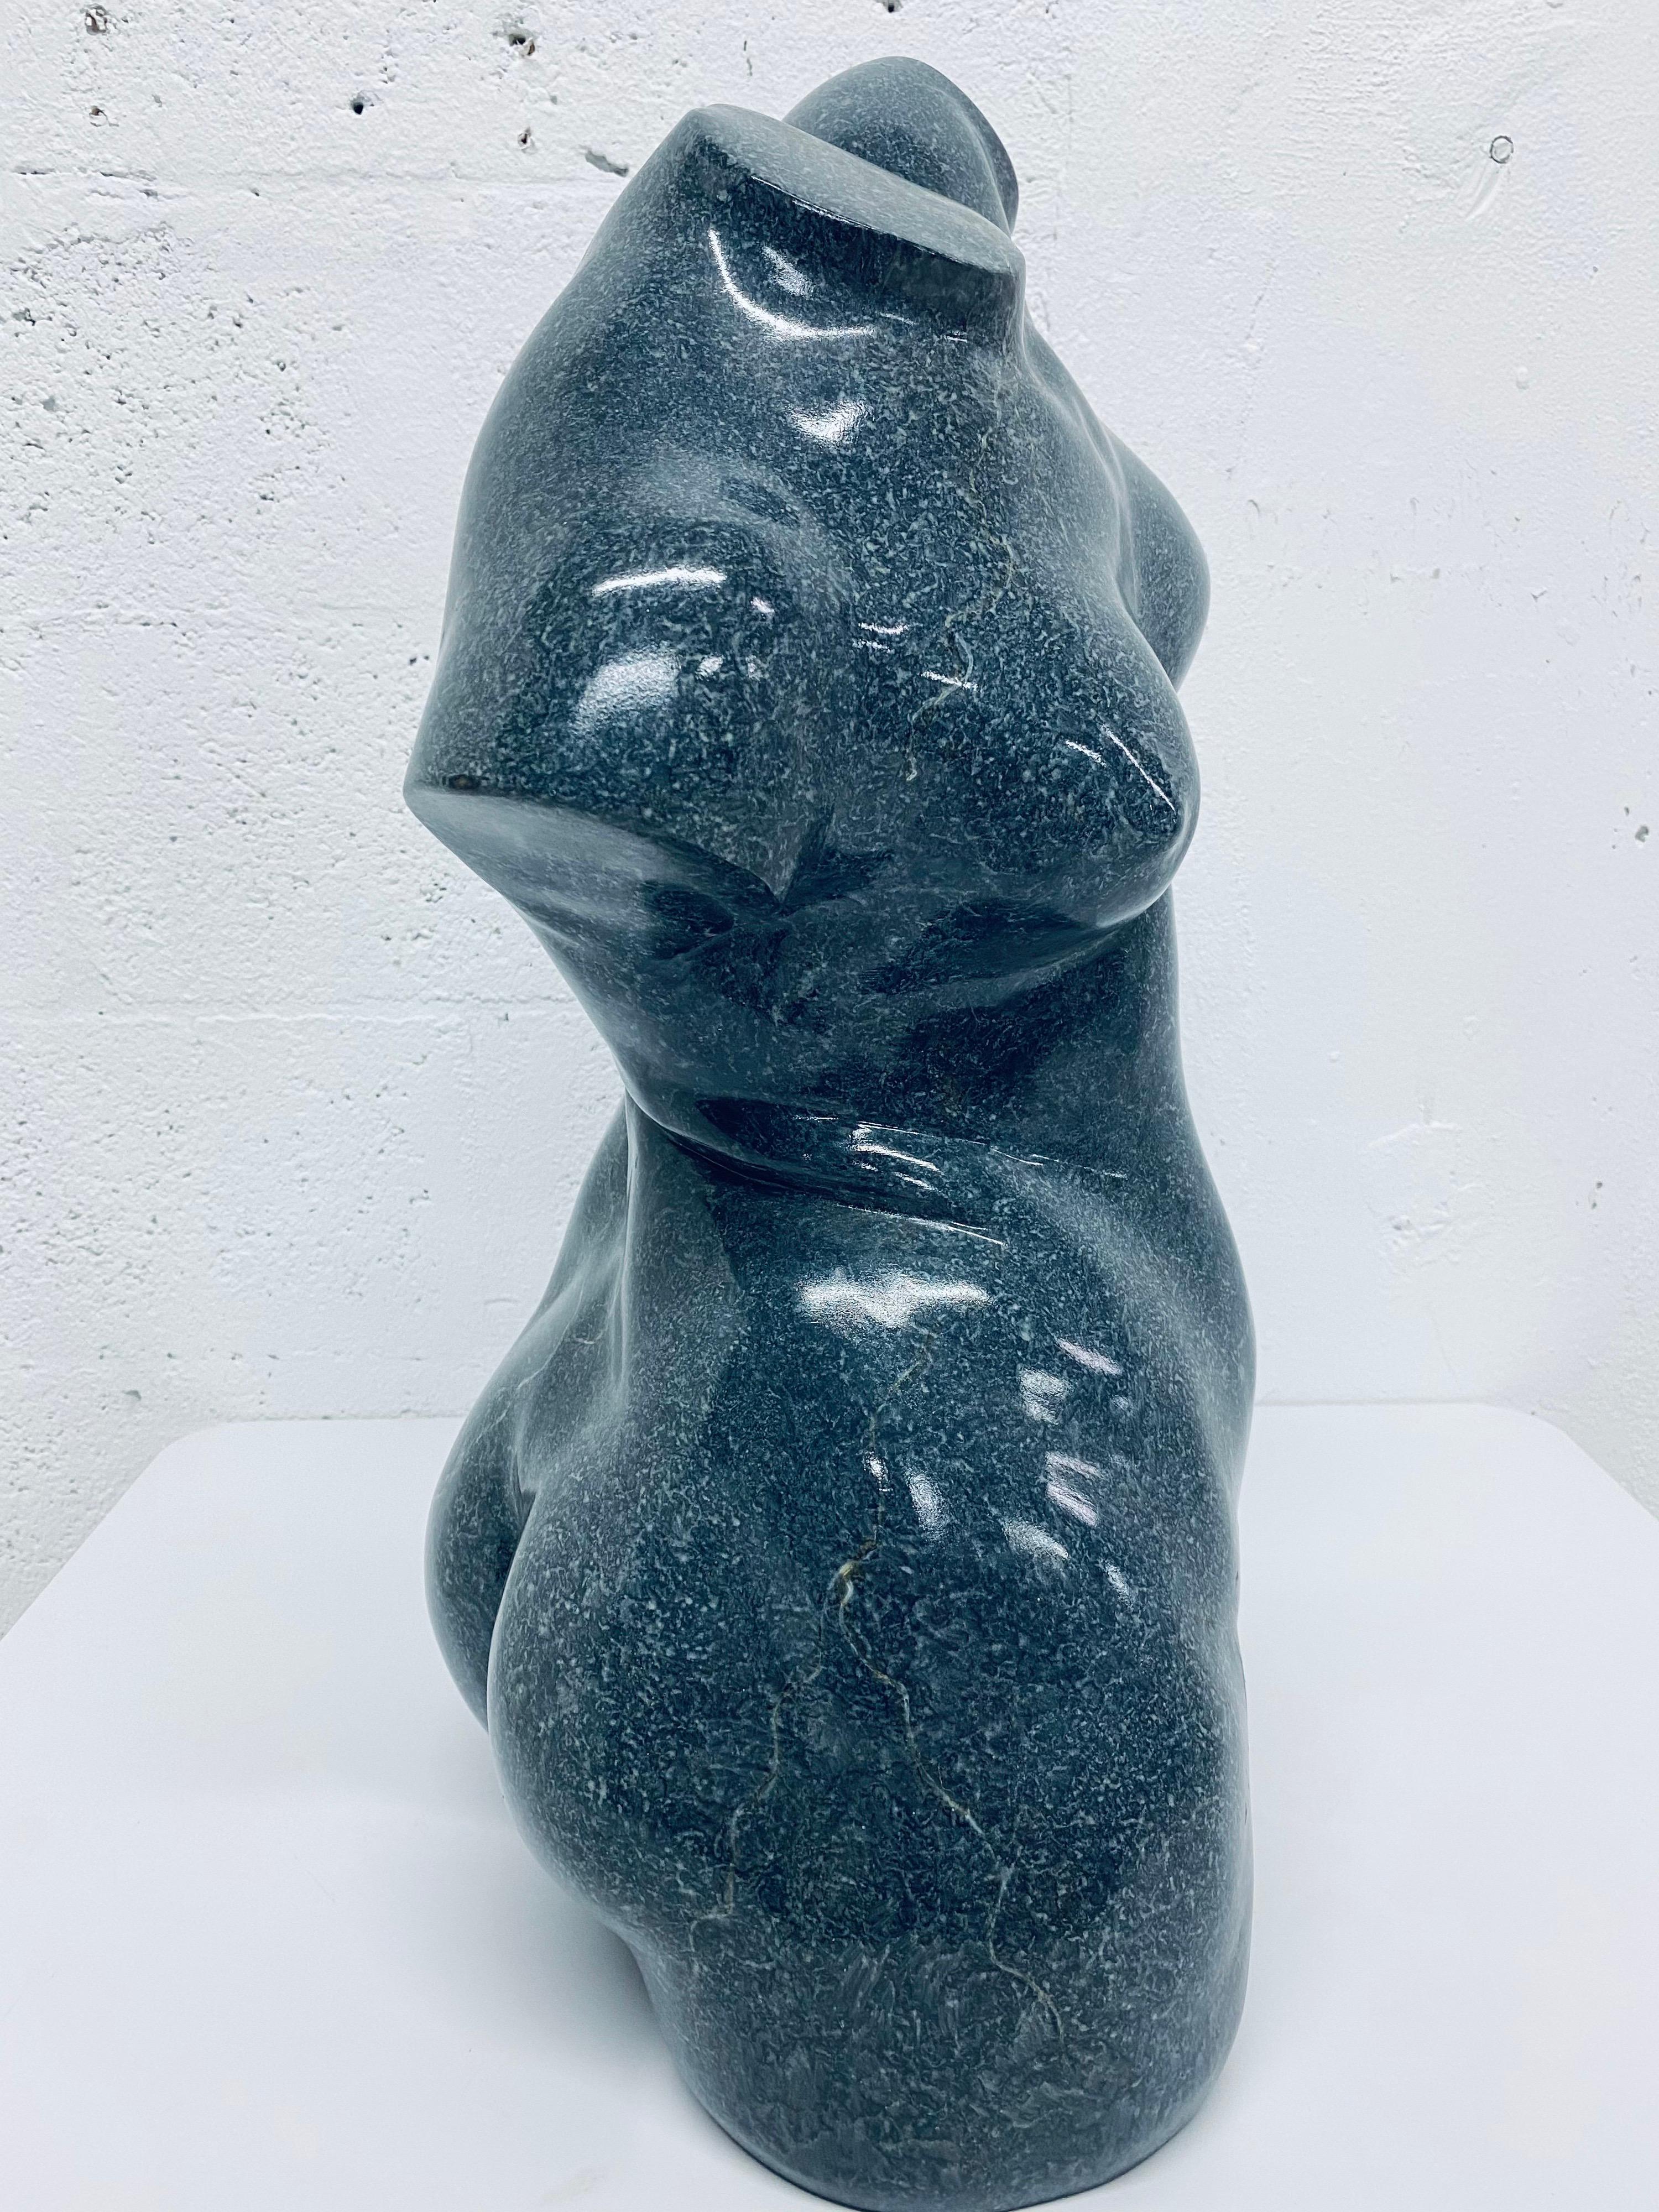 Unknown Postmodern Female Resin Bust with Gray Speckled Lacquer Finish, 1980s